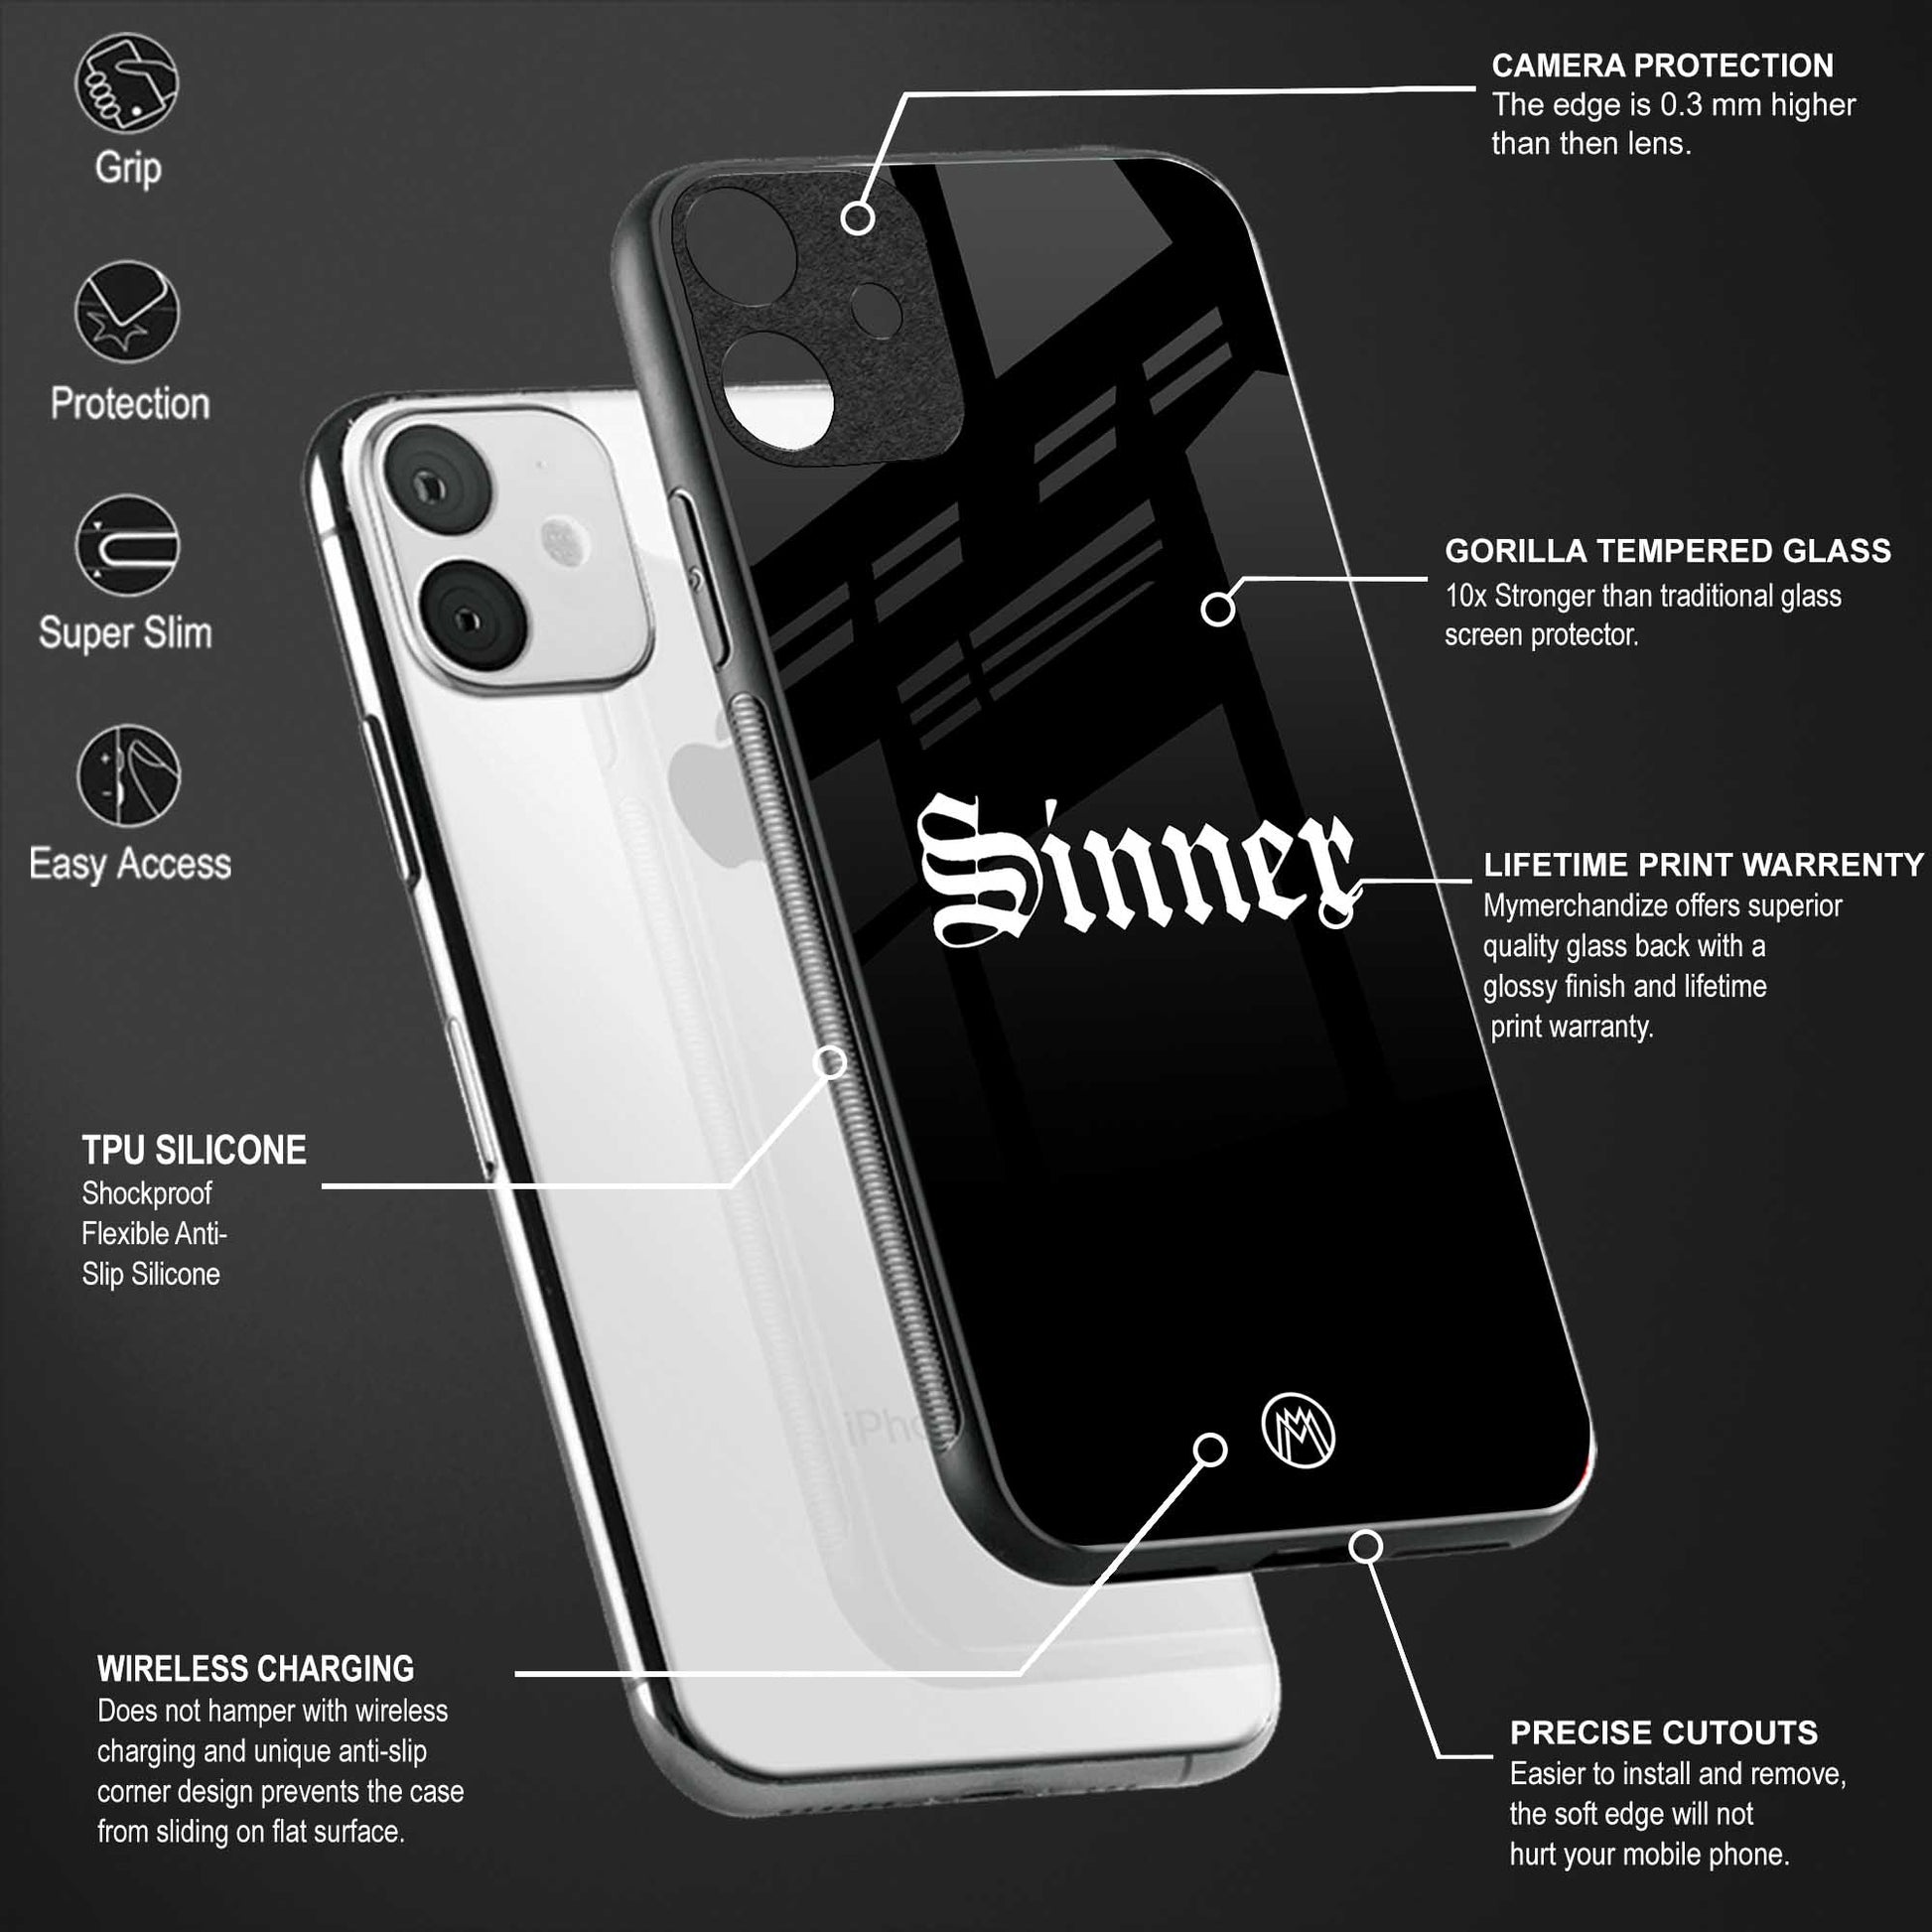 sinner back phone cover | glass case for samsung galaxy a33 5g